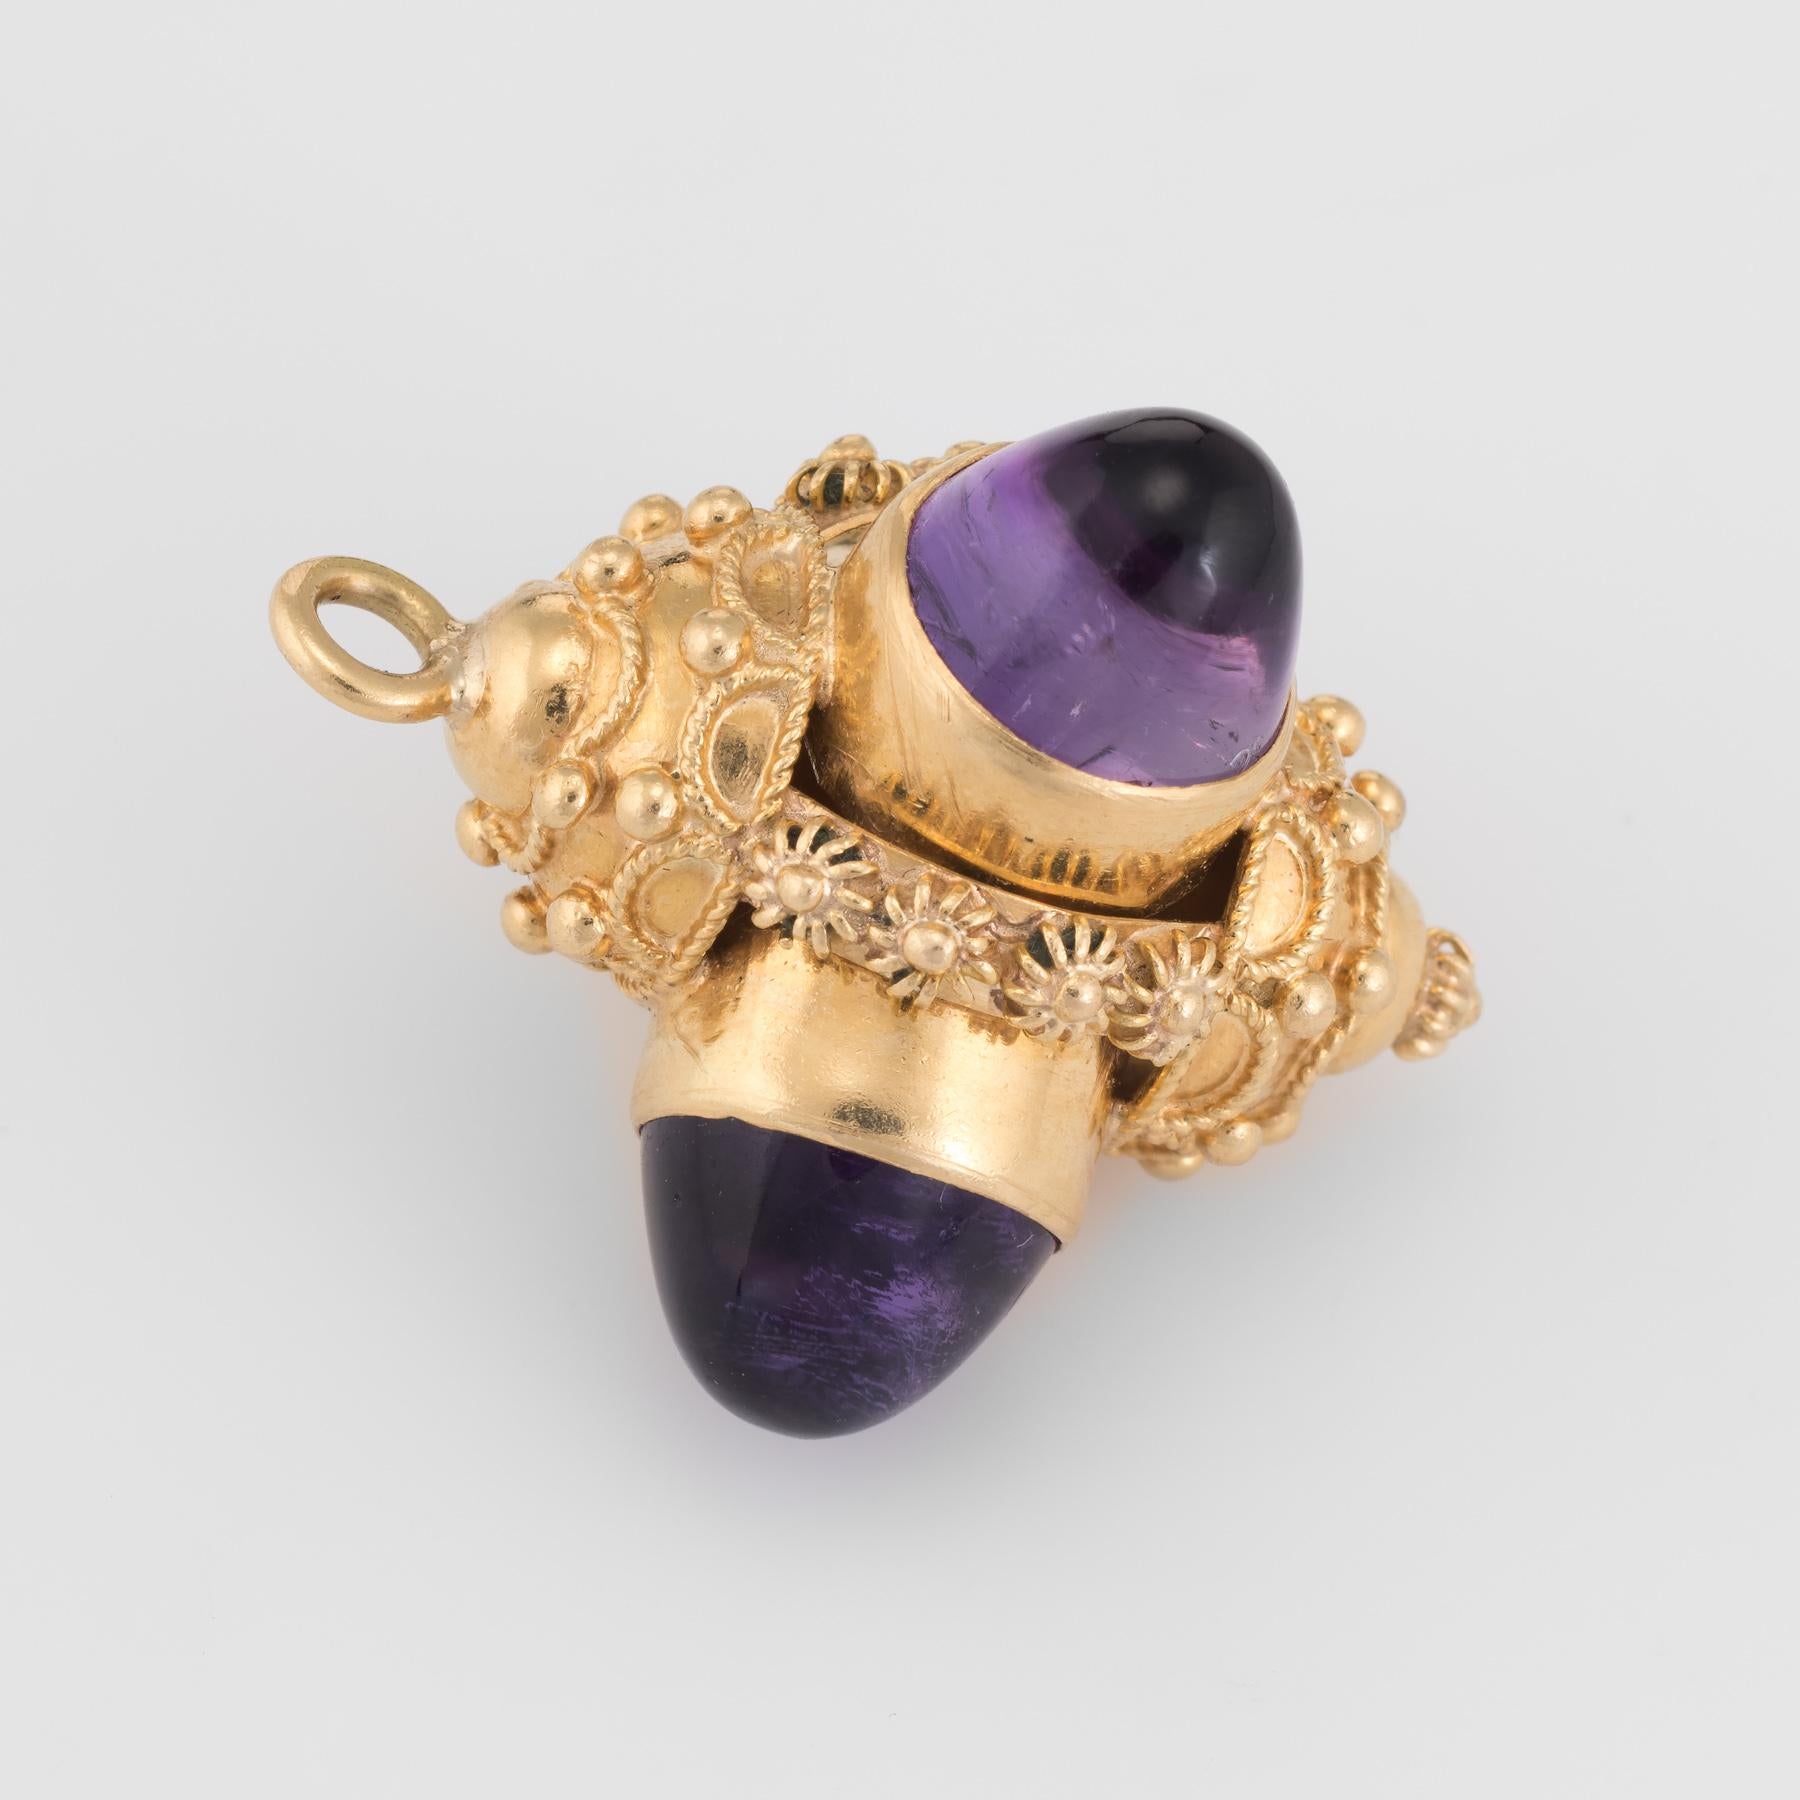 Finely detailed vintage Etruscan style pendant (or charm), crafted in 18 karat yellow gold.  

Three amethysts are cabochon cut measuring 8.5mm x 5mm. The amethysts are a deep royal purple color and in excellent condition (free of cracks or chips).